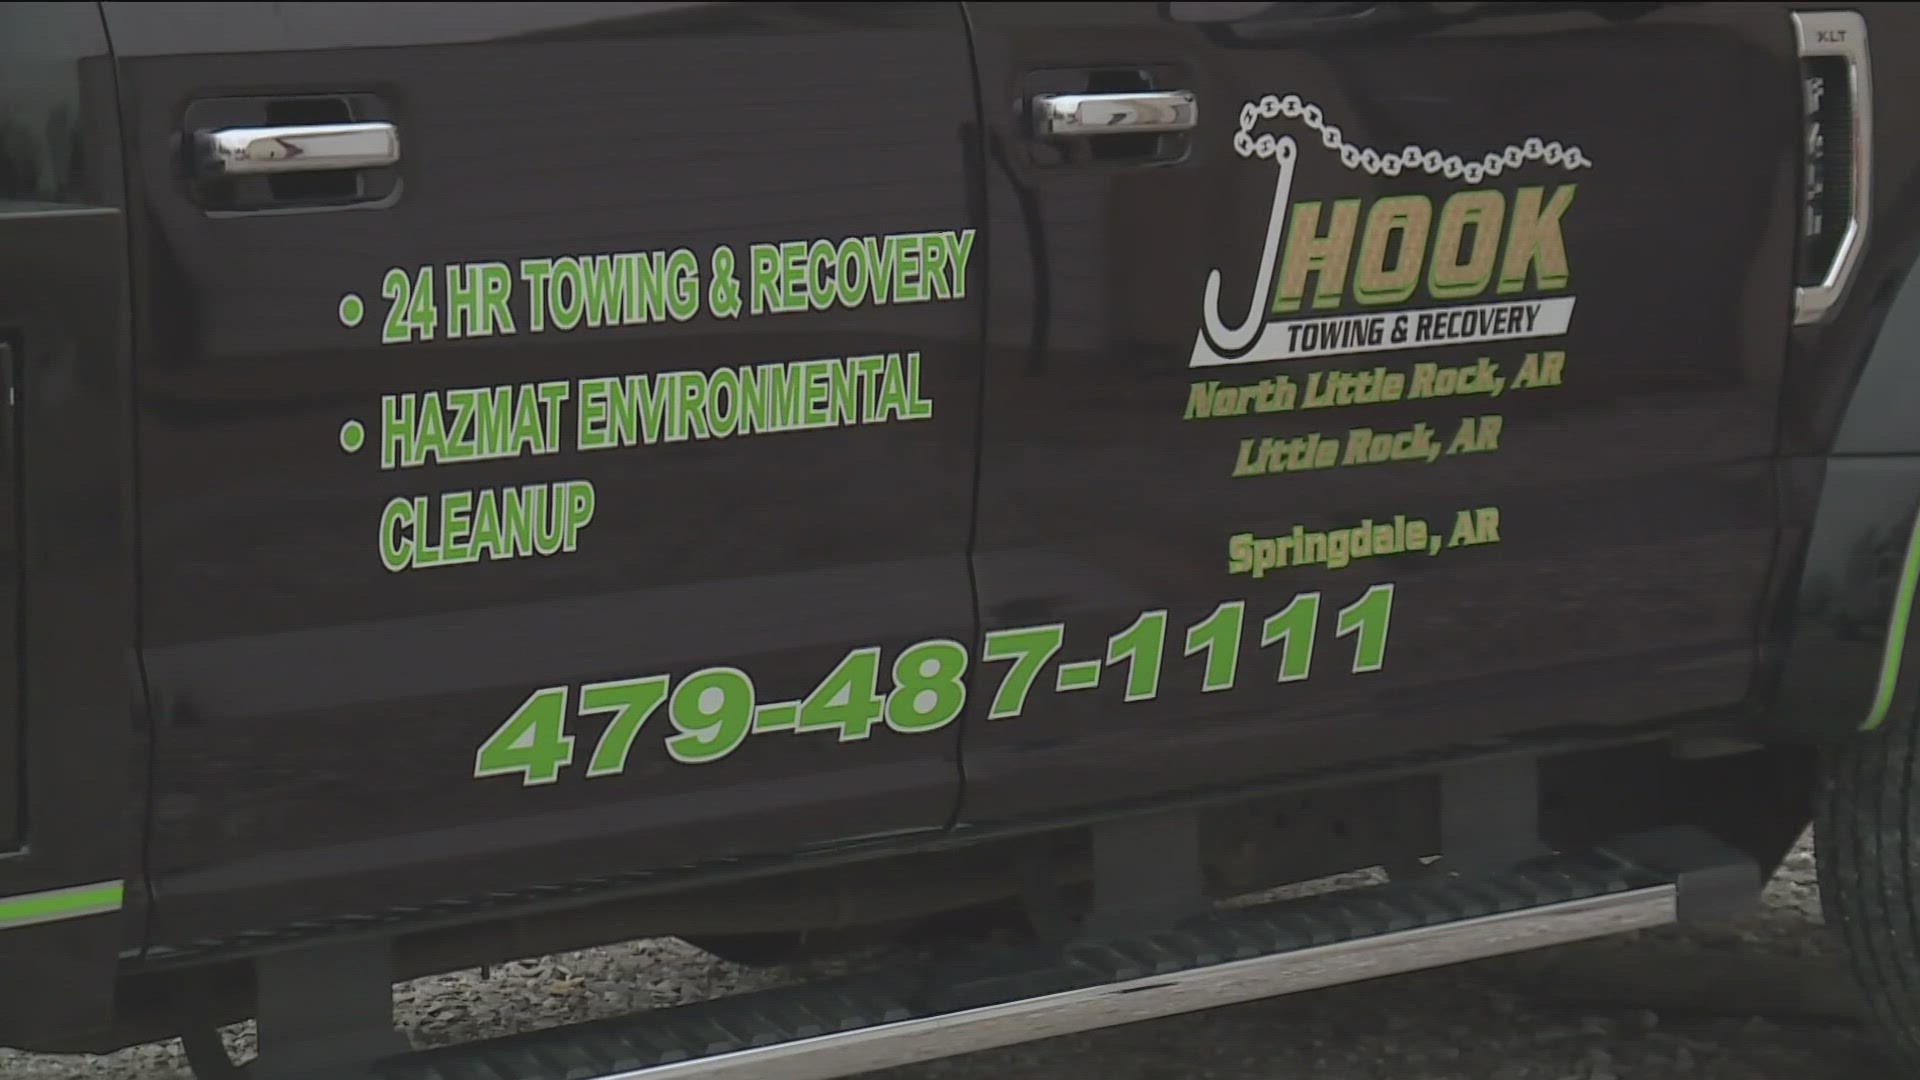 JHook Towing & Recovery is bringing its first New Year's Eve towing service to Washington County to ensure folks get home safe.